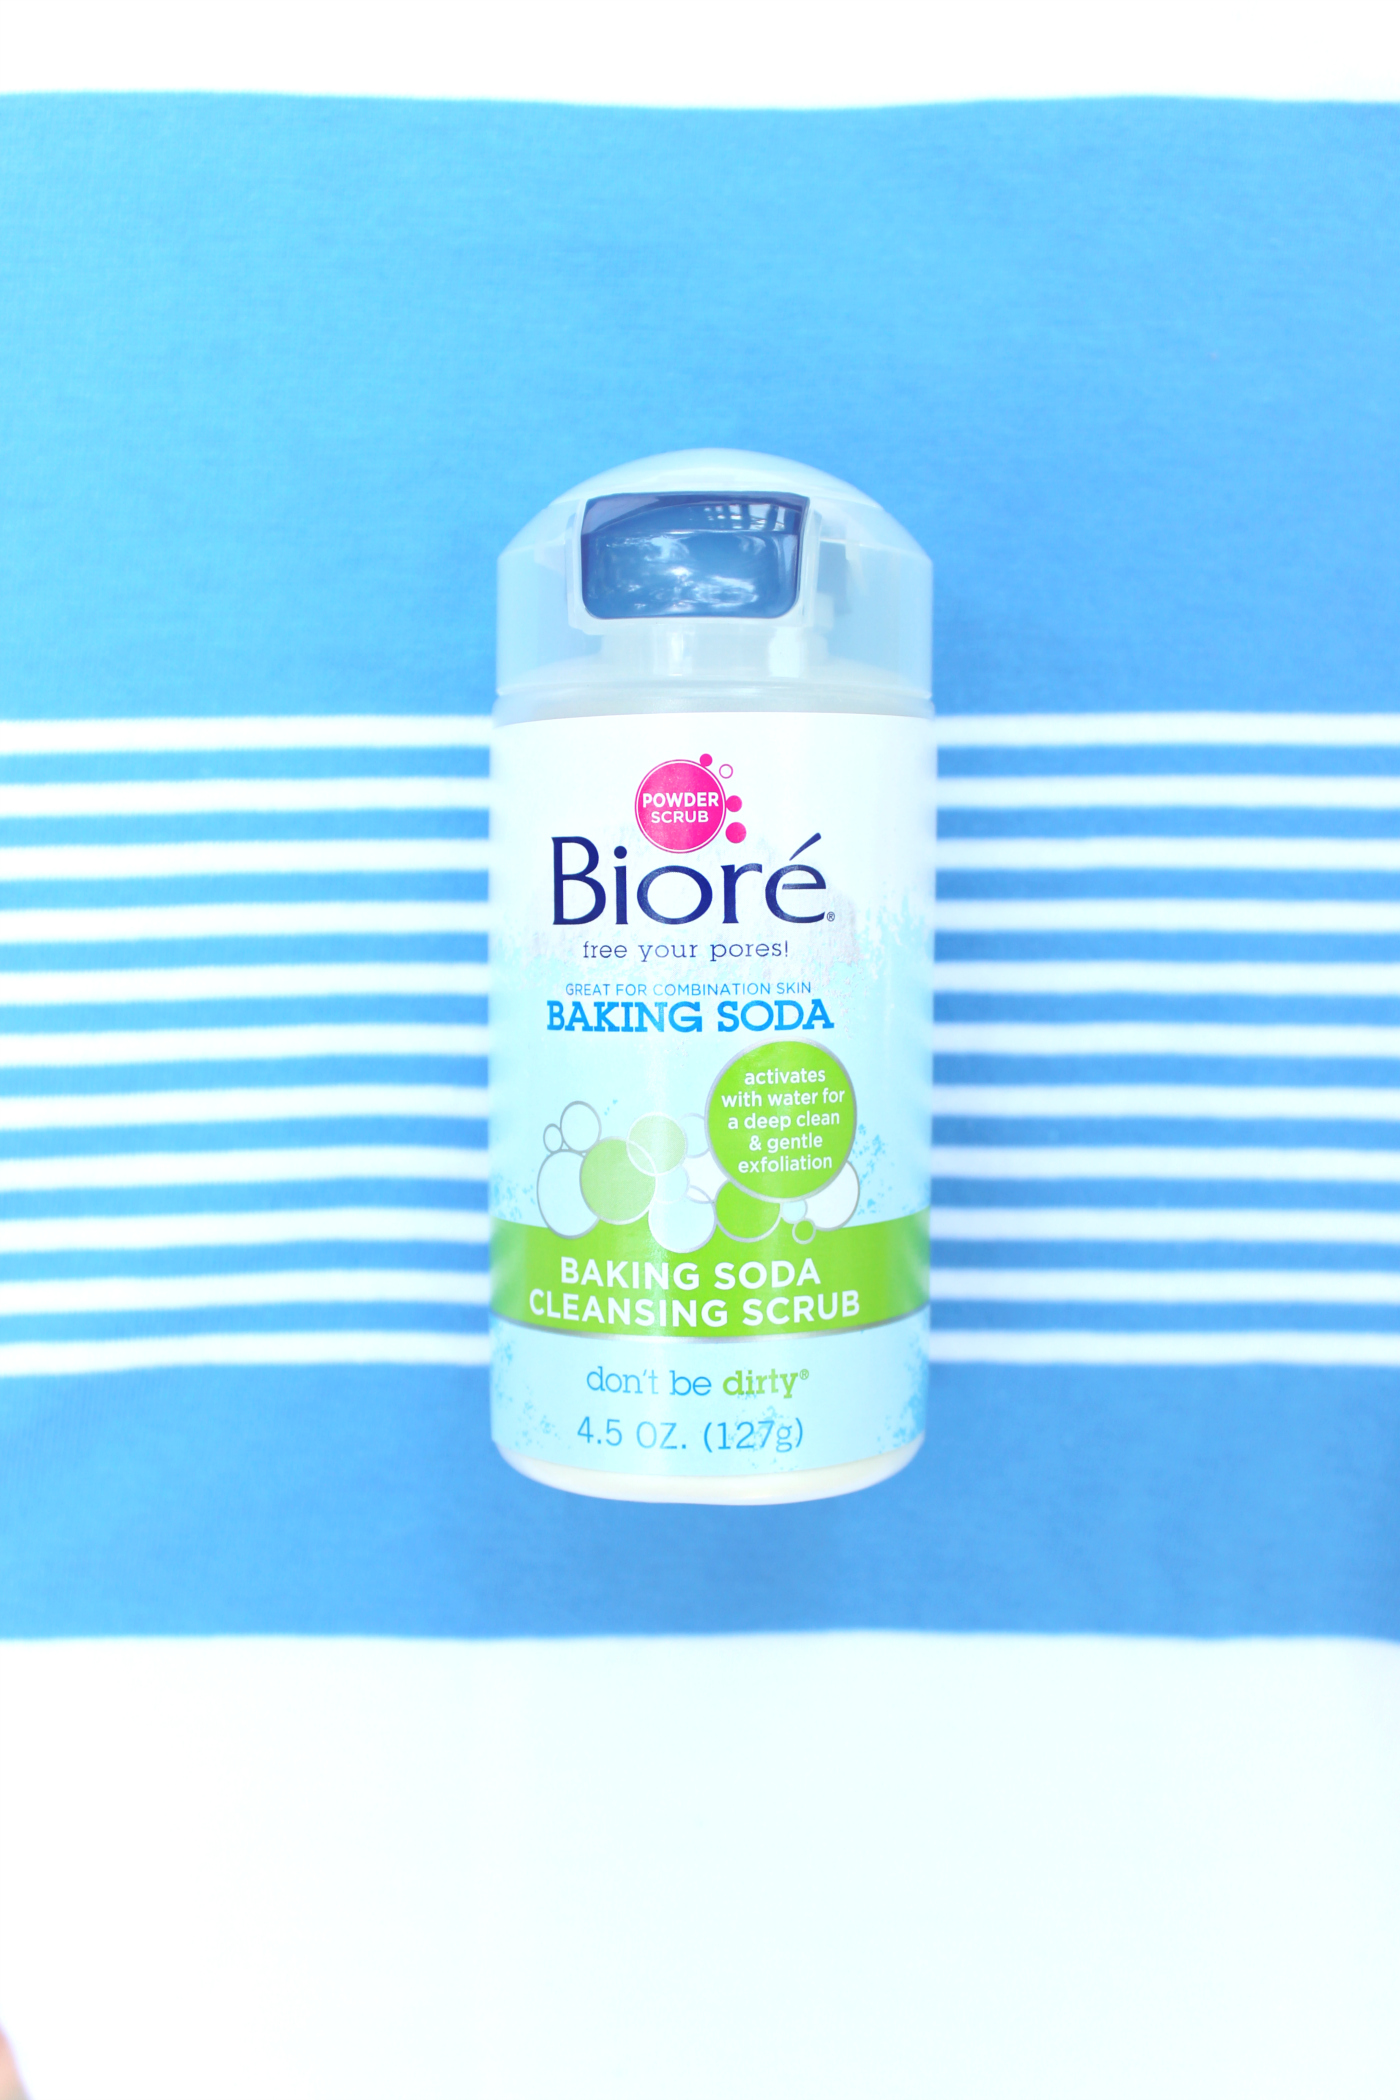 Update your fall skincare routine with a new baking soda cleansing scrub from Bioré